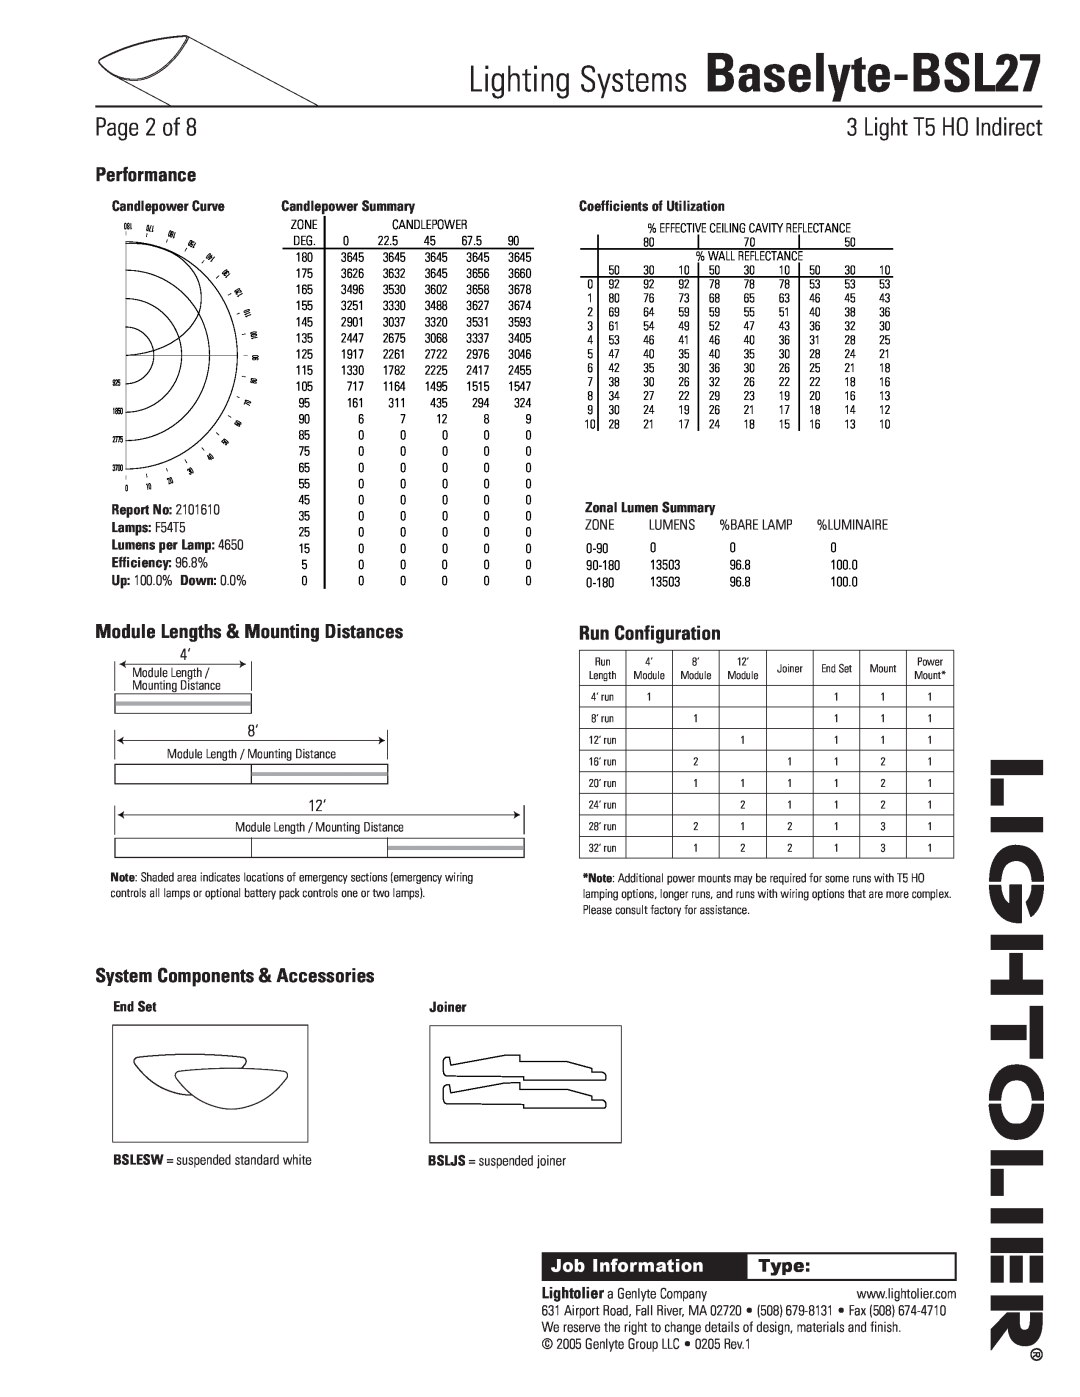 Lightolier Lighting Systems Baselyte-BSL27, Page of, Performance, Module Lengths & Mounting Distances, Type, End Set 